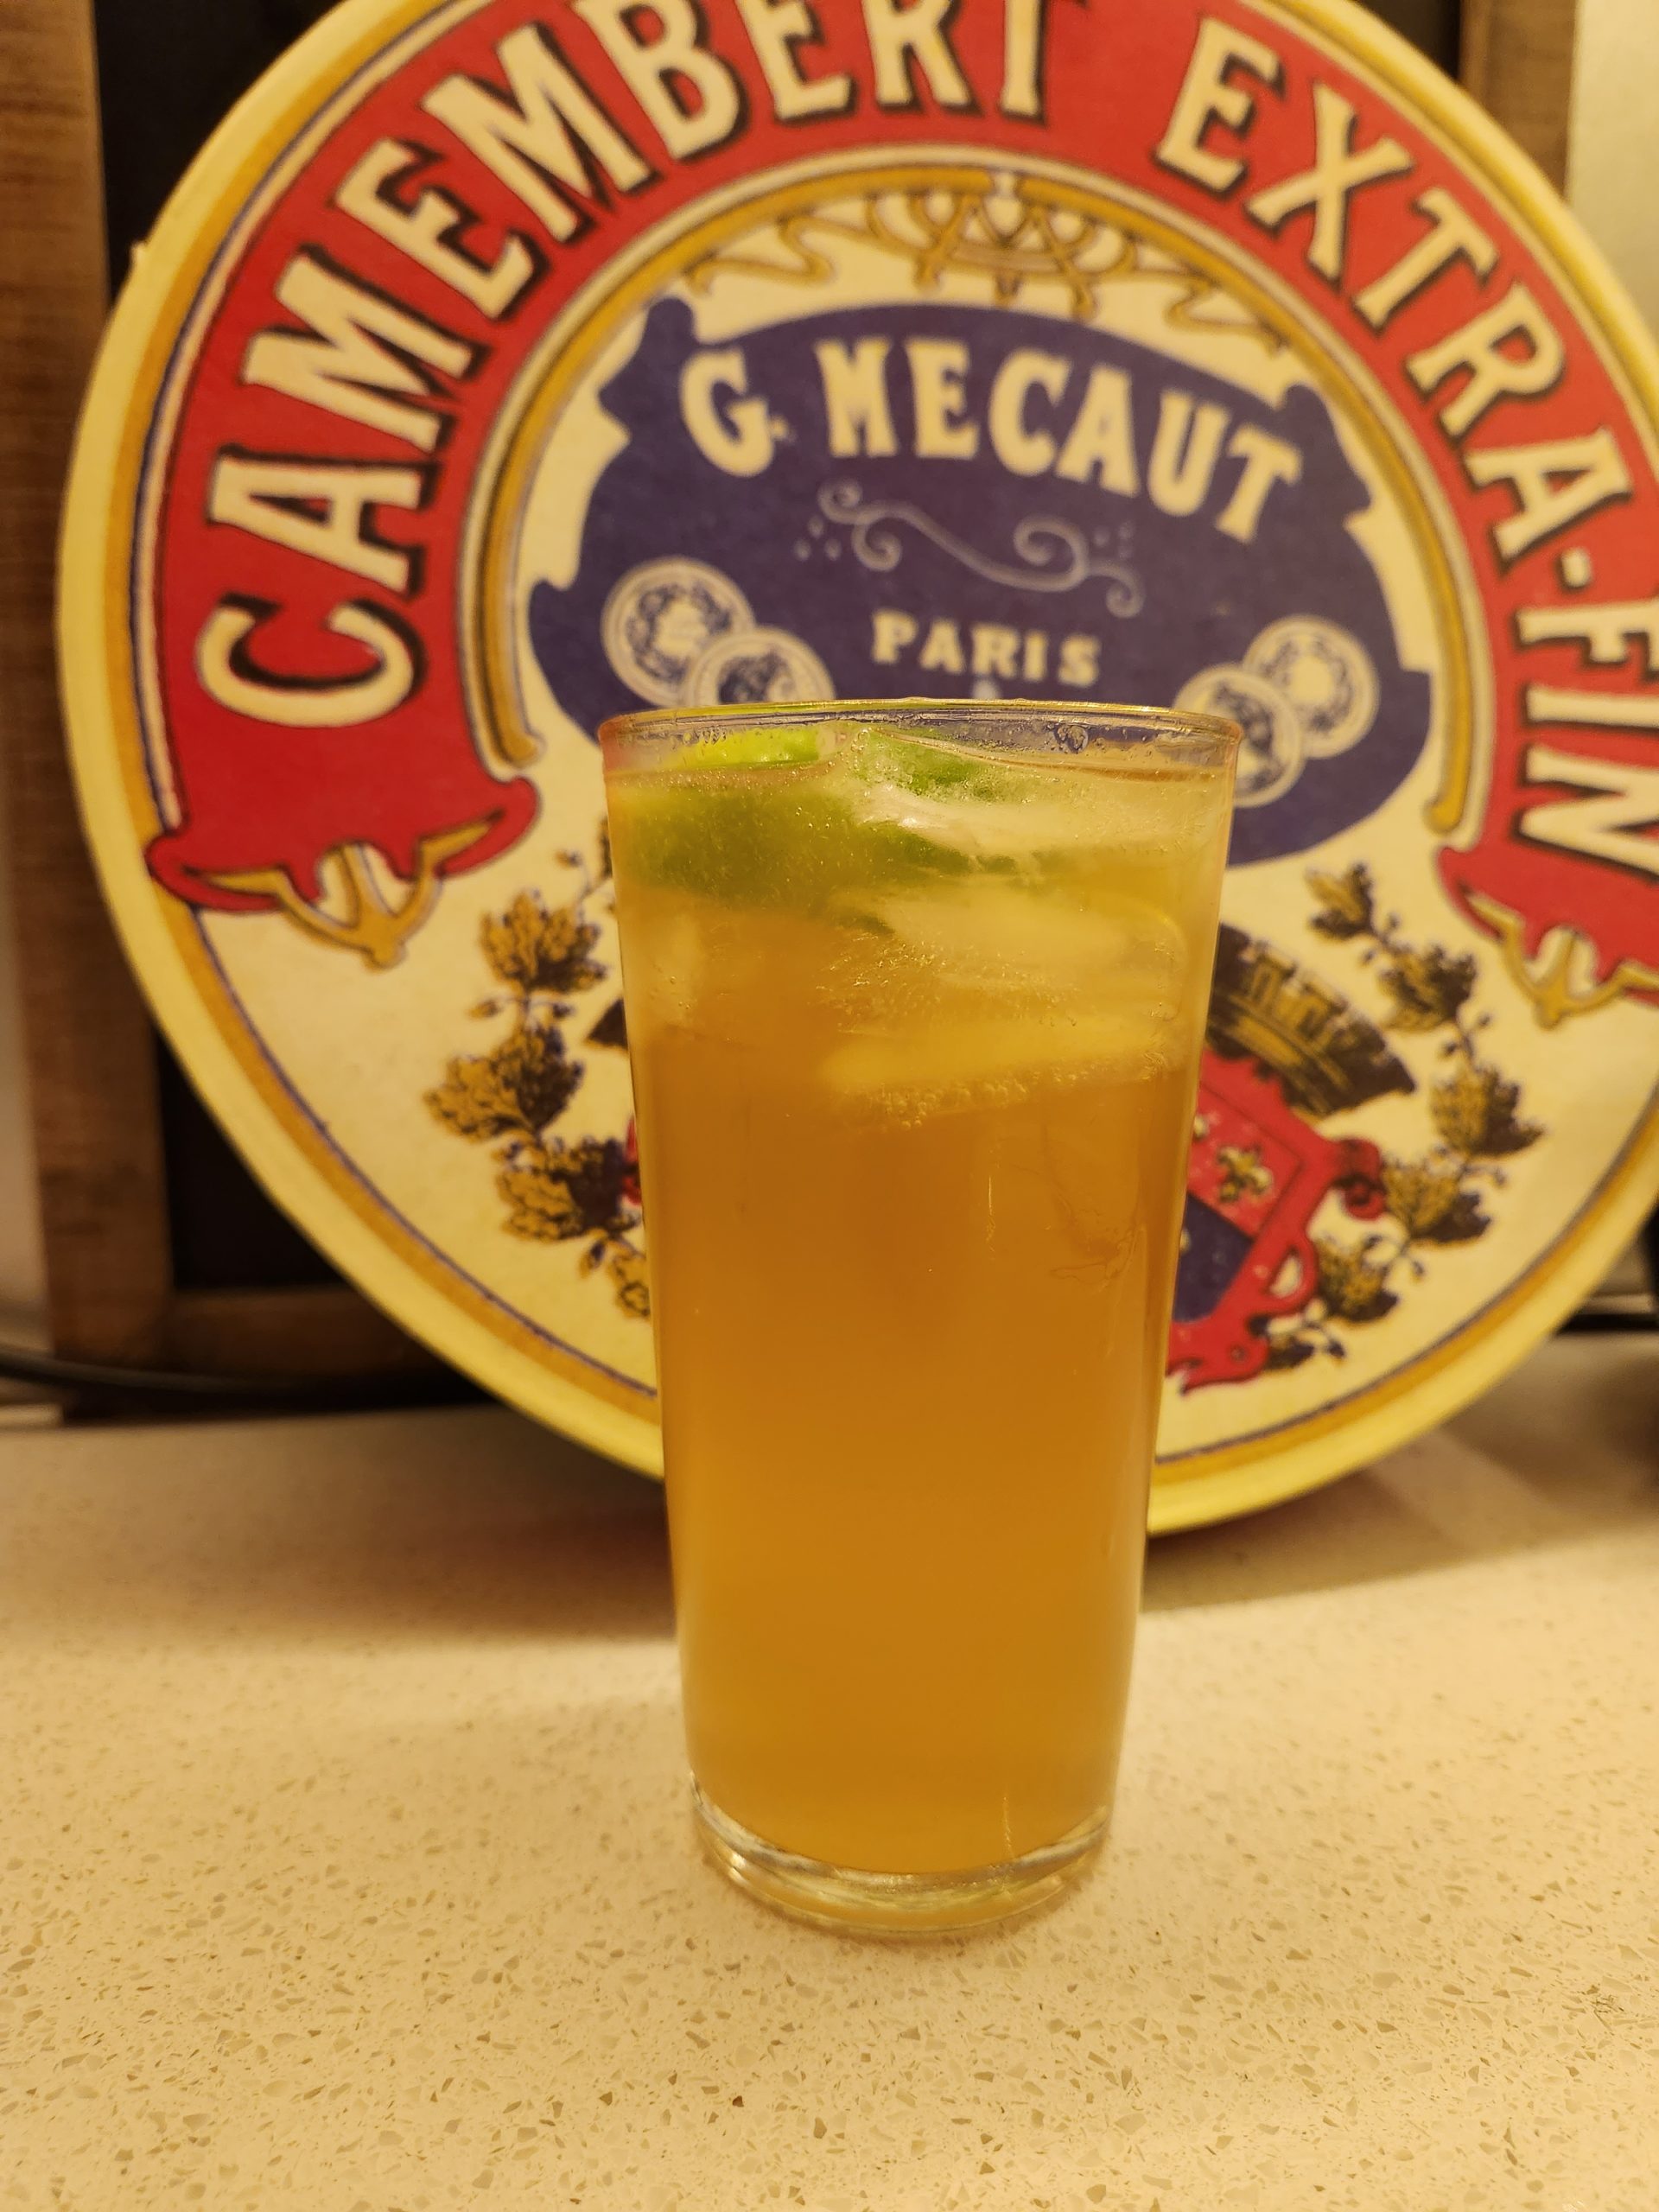 A Dark and Stormy cocktail.